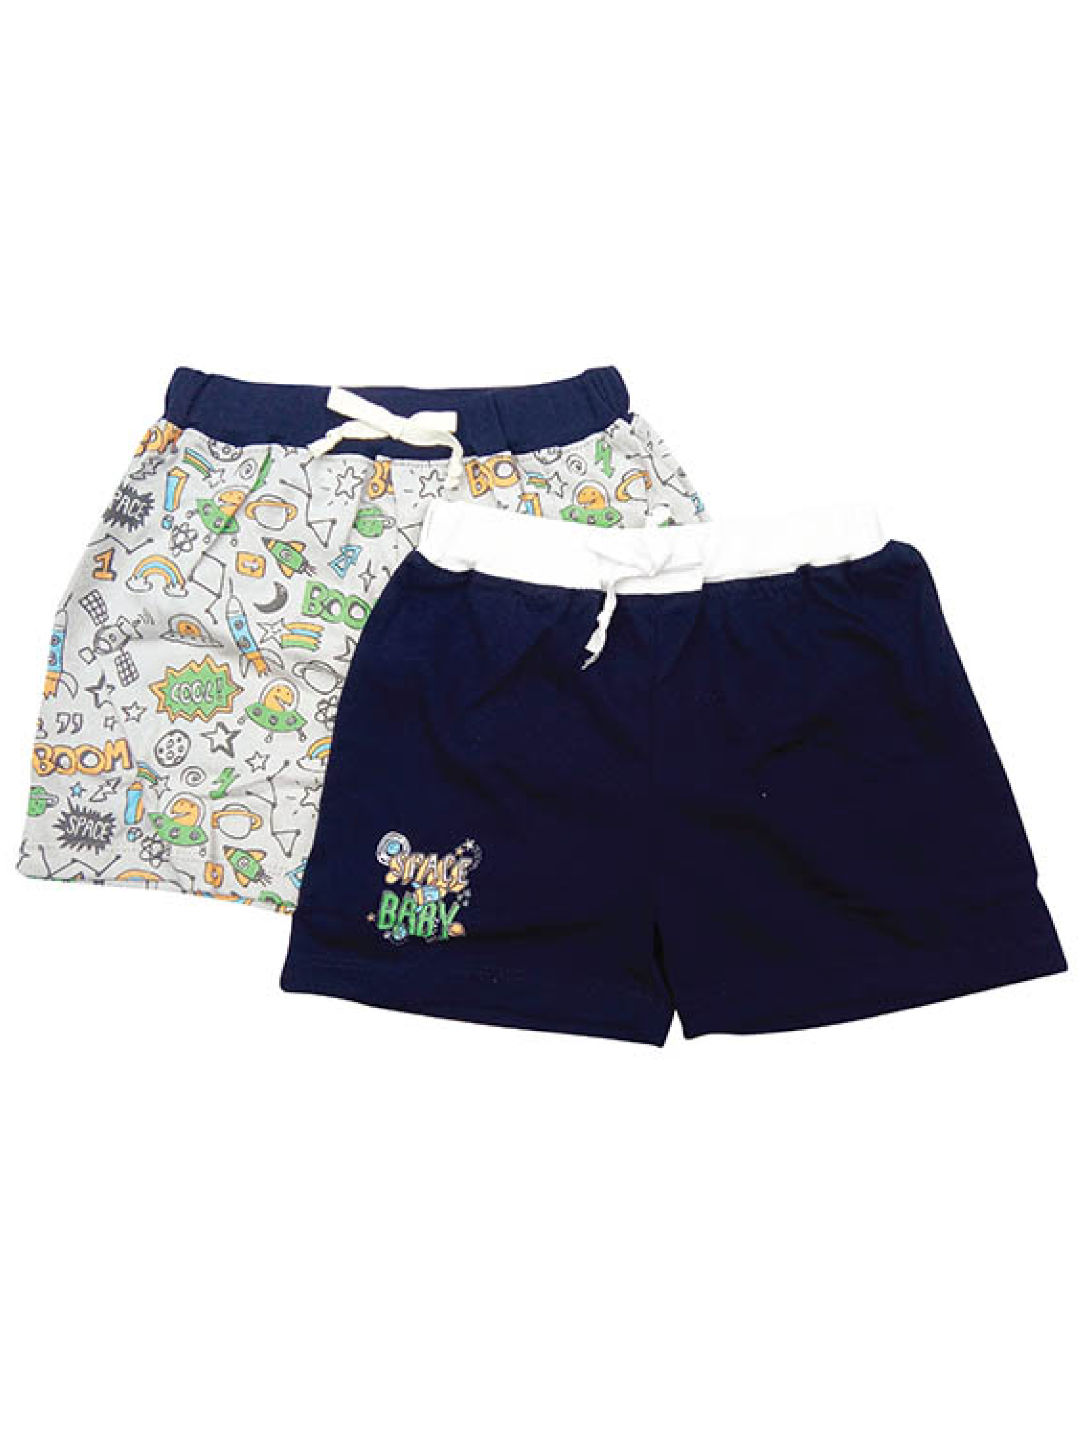 Looms Space Baby Collection Shorts 2 pcs (Boy)